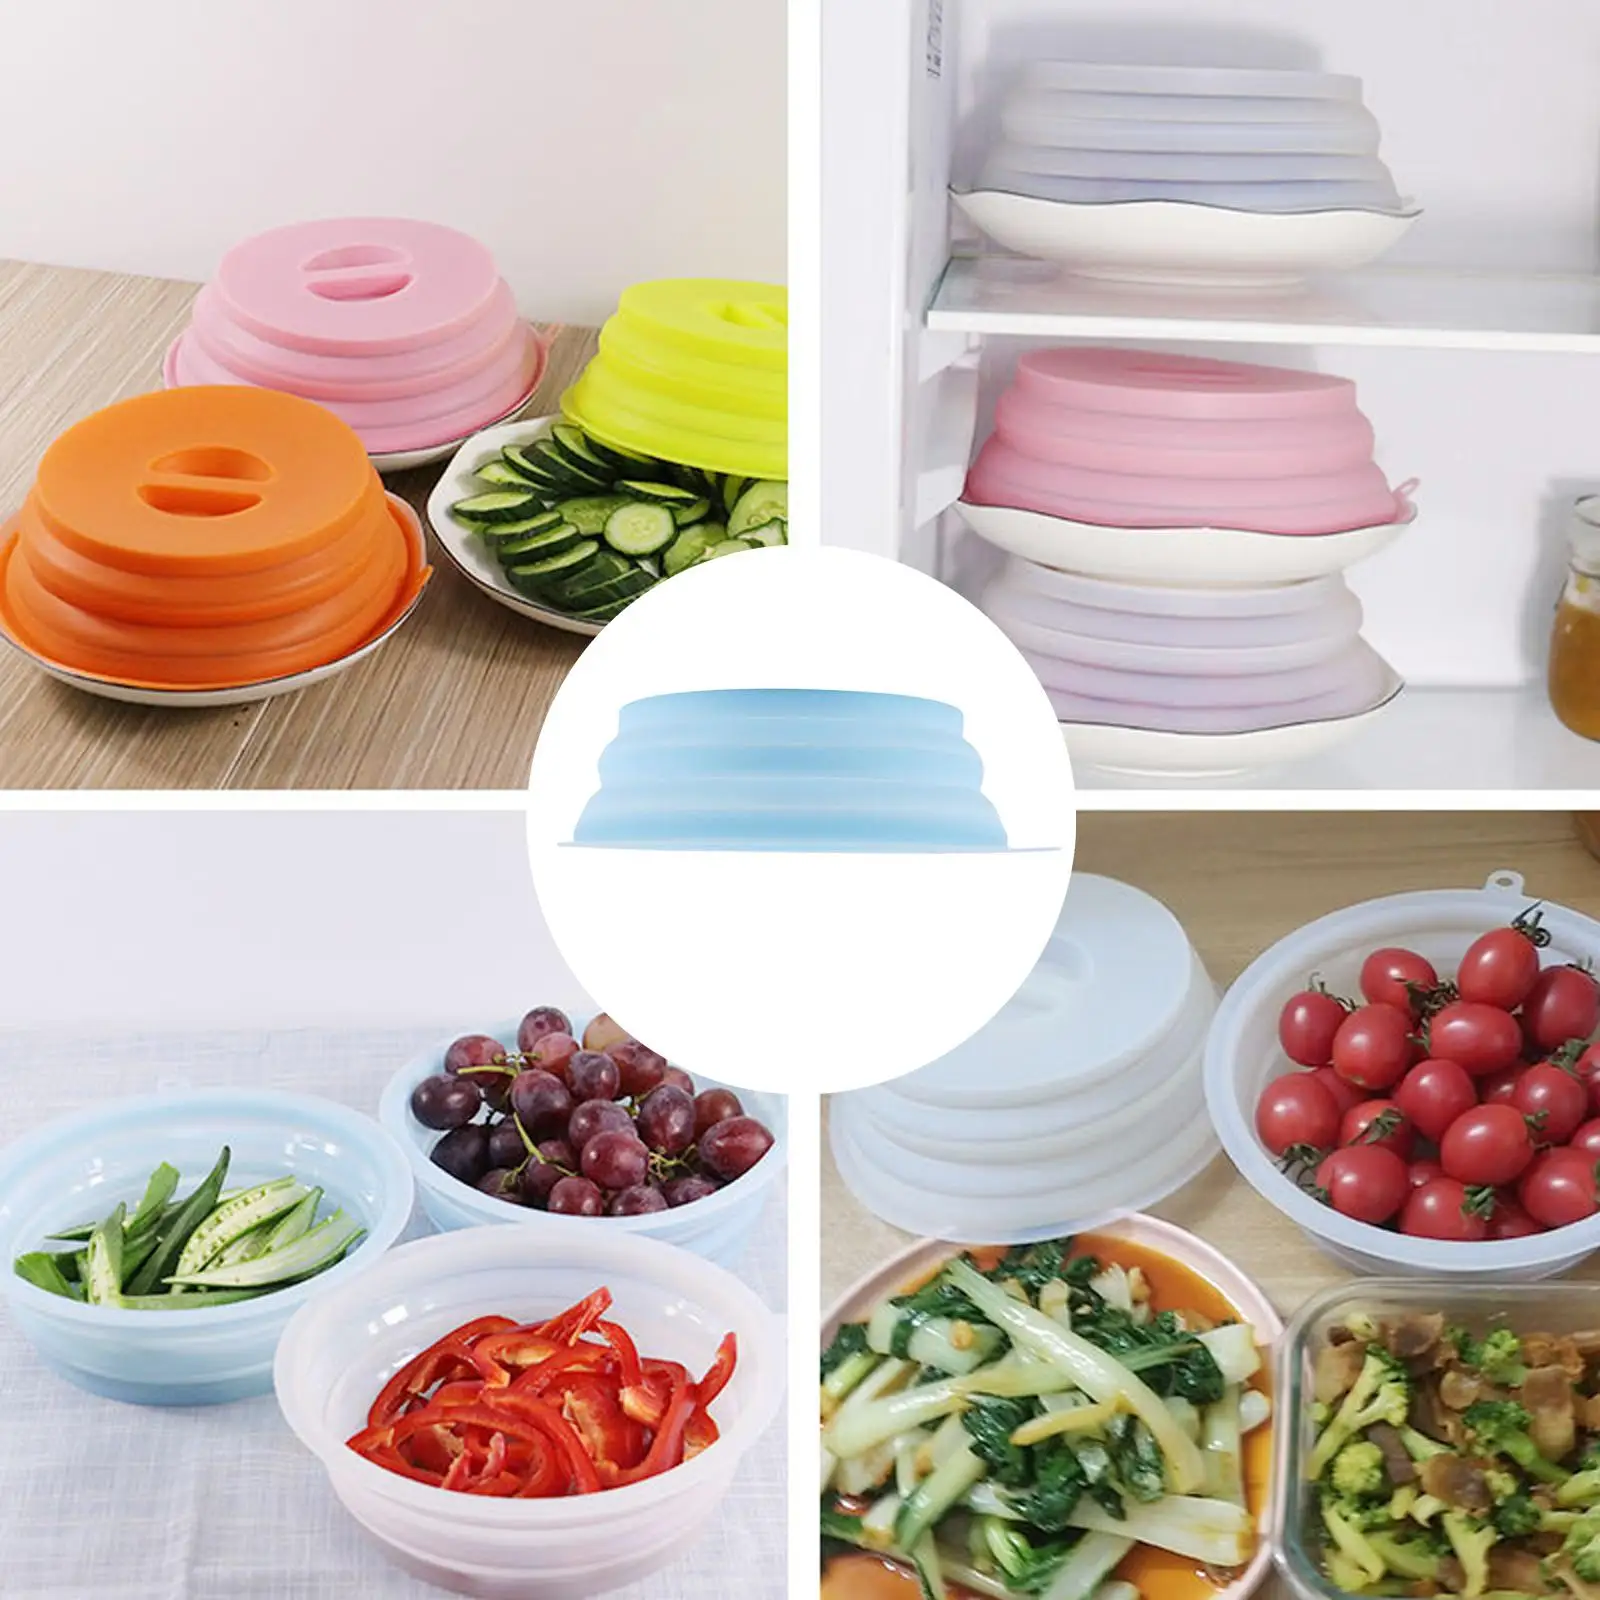 Folding Microwave Splatter Cover Plate Cover Easy Grip Stackable BPA Free for Fruit Vegetables Can Be Hung ,Dishwasher-Safe